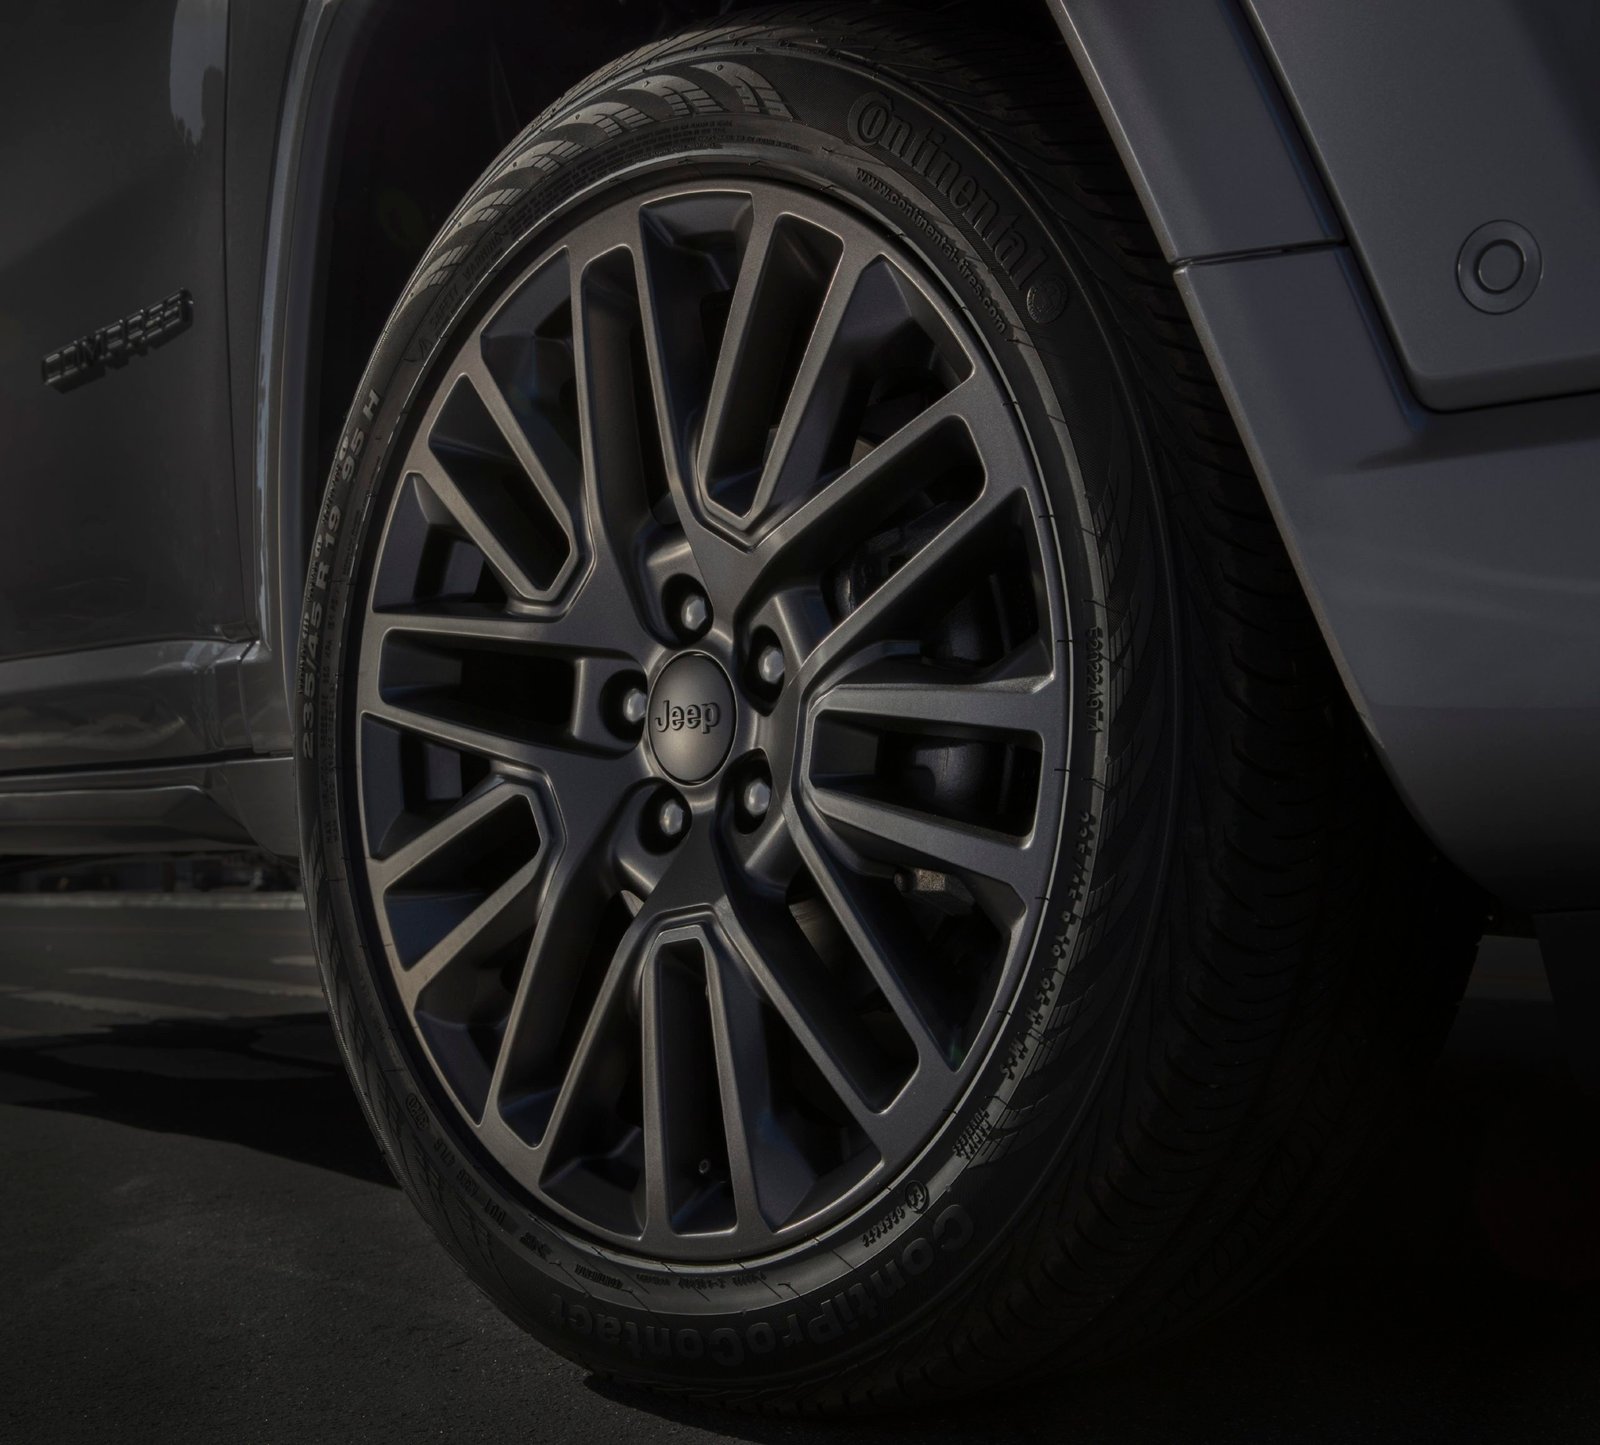 2022 Jeep® Compass High Altitude with 19-inch aluminum painted Satin Granite Crystal wheels.